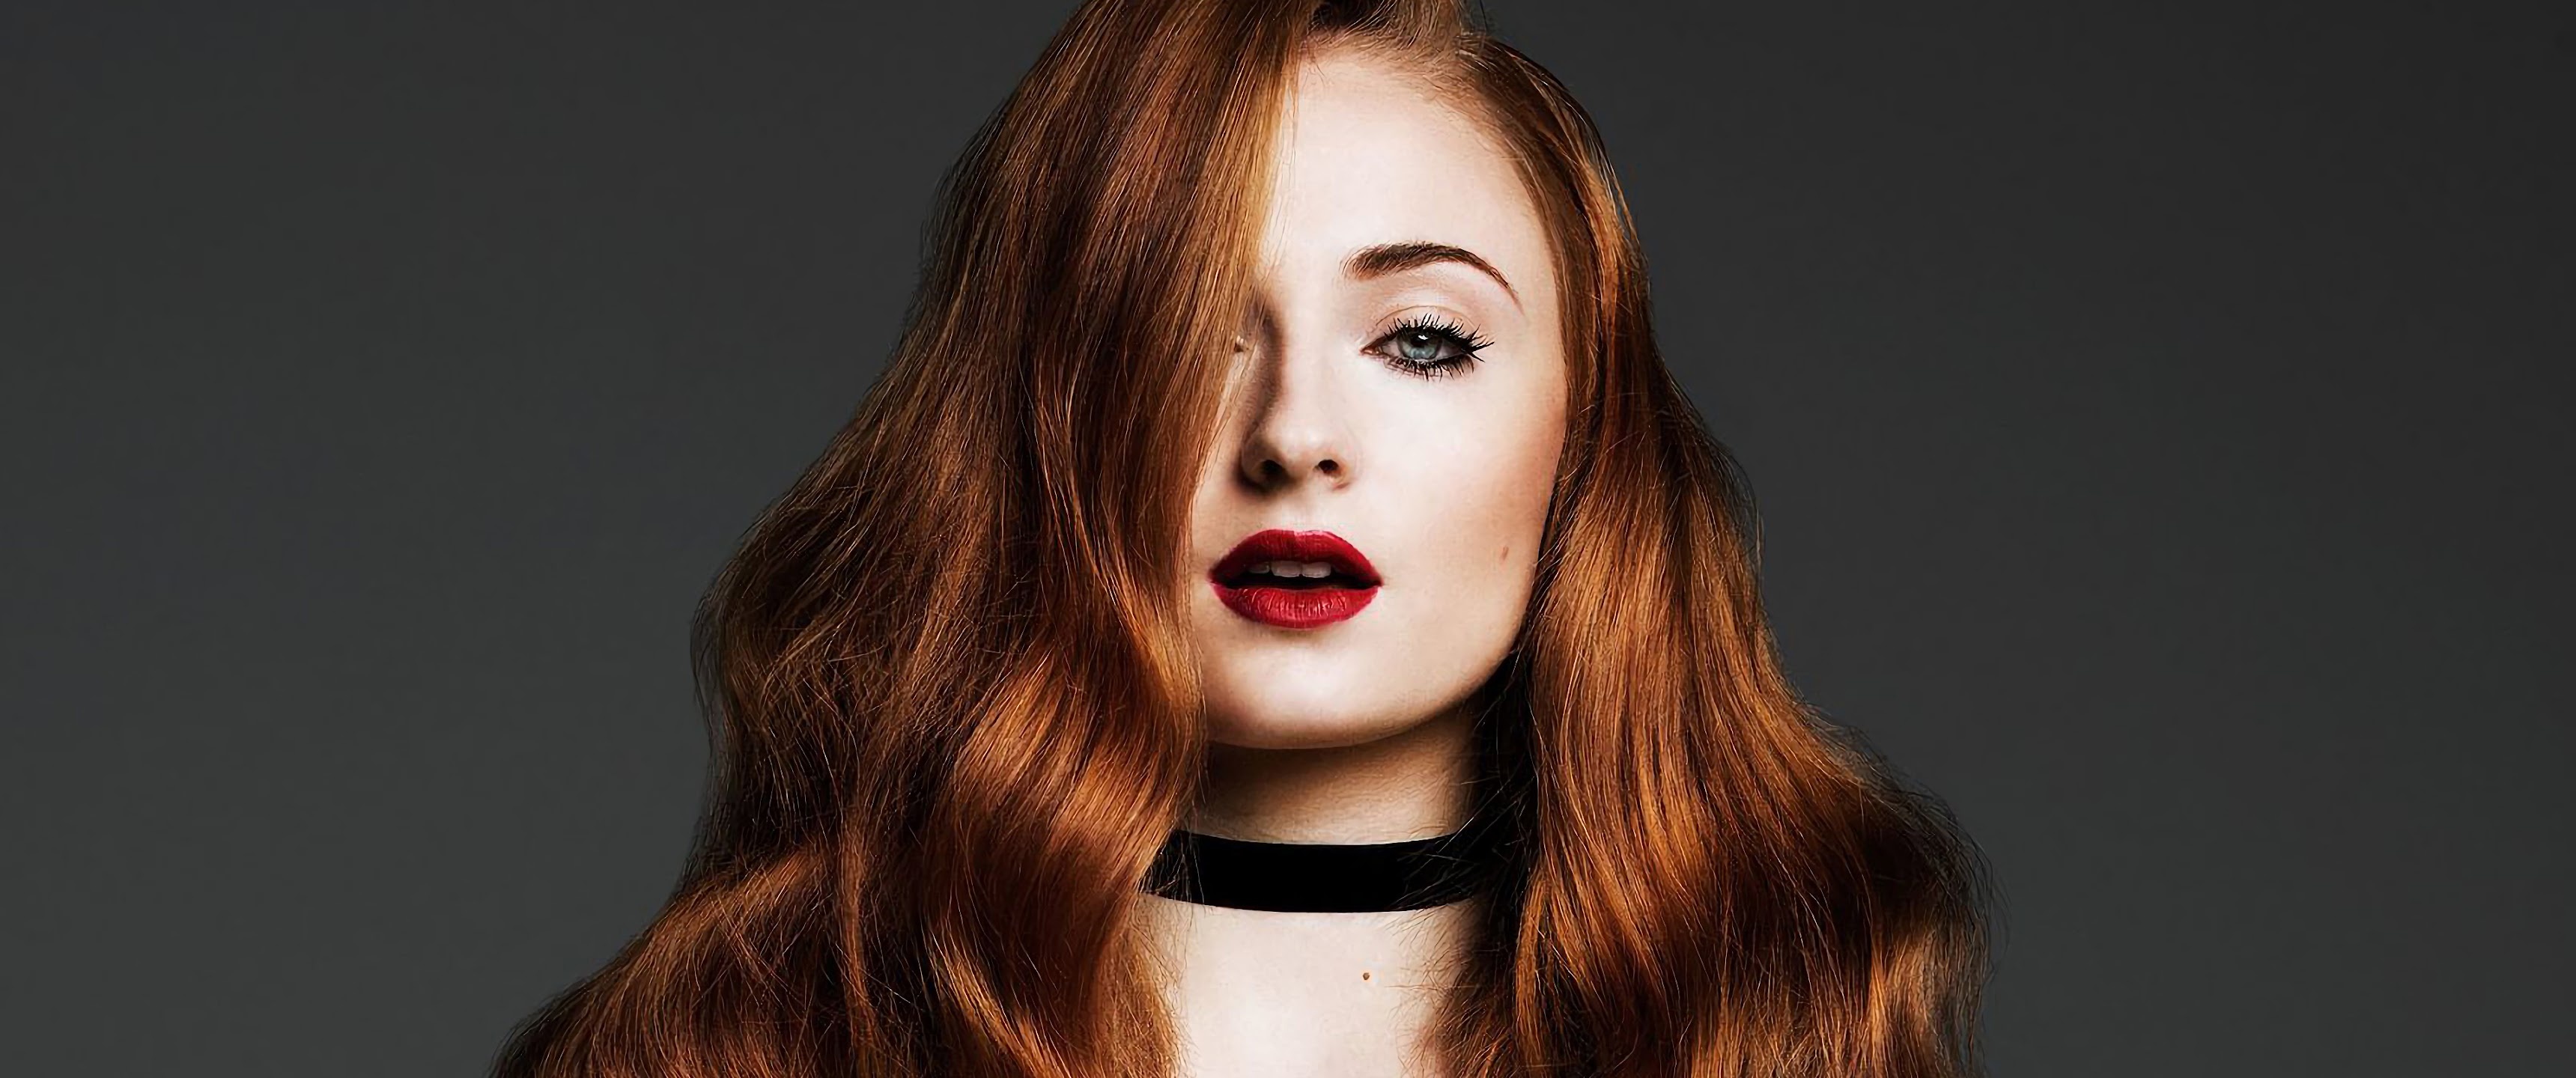 Sophie Turner: Was nominated for Choice Sci-Fi Movie Actress at 2019 Teen Choice Awards. 3440x1440 Dual Screen Background.